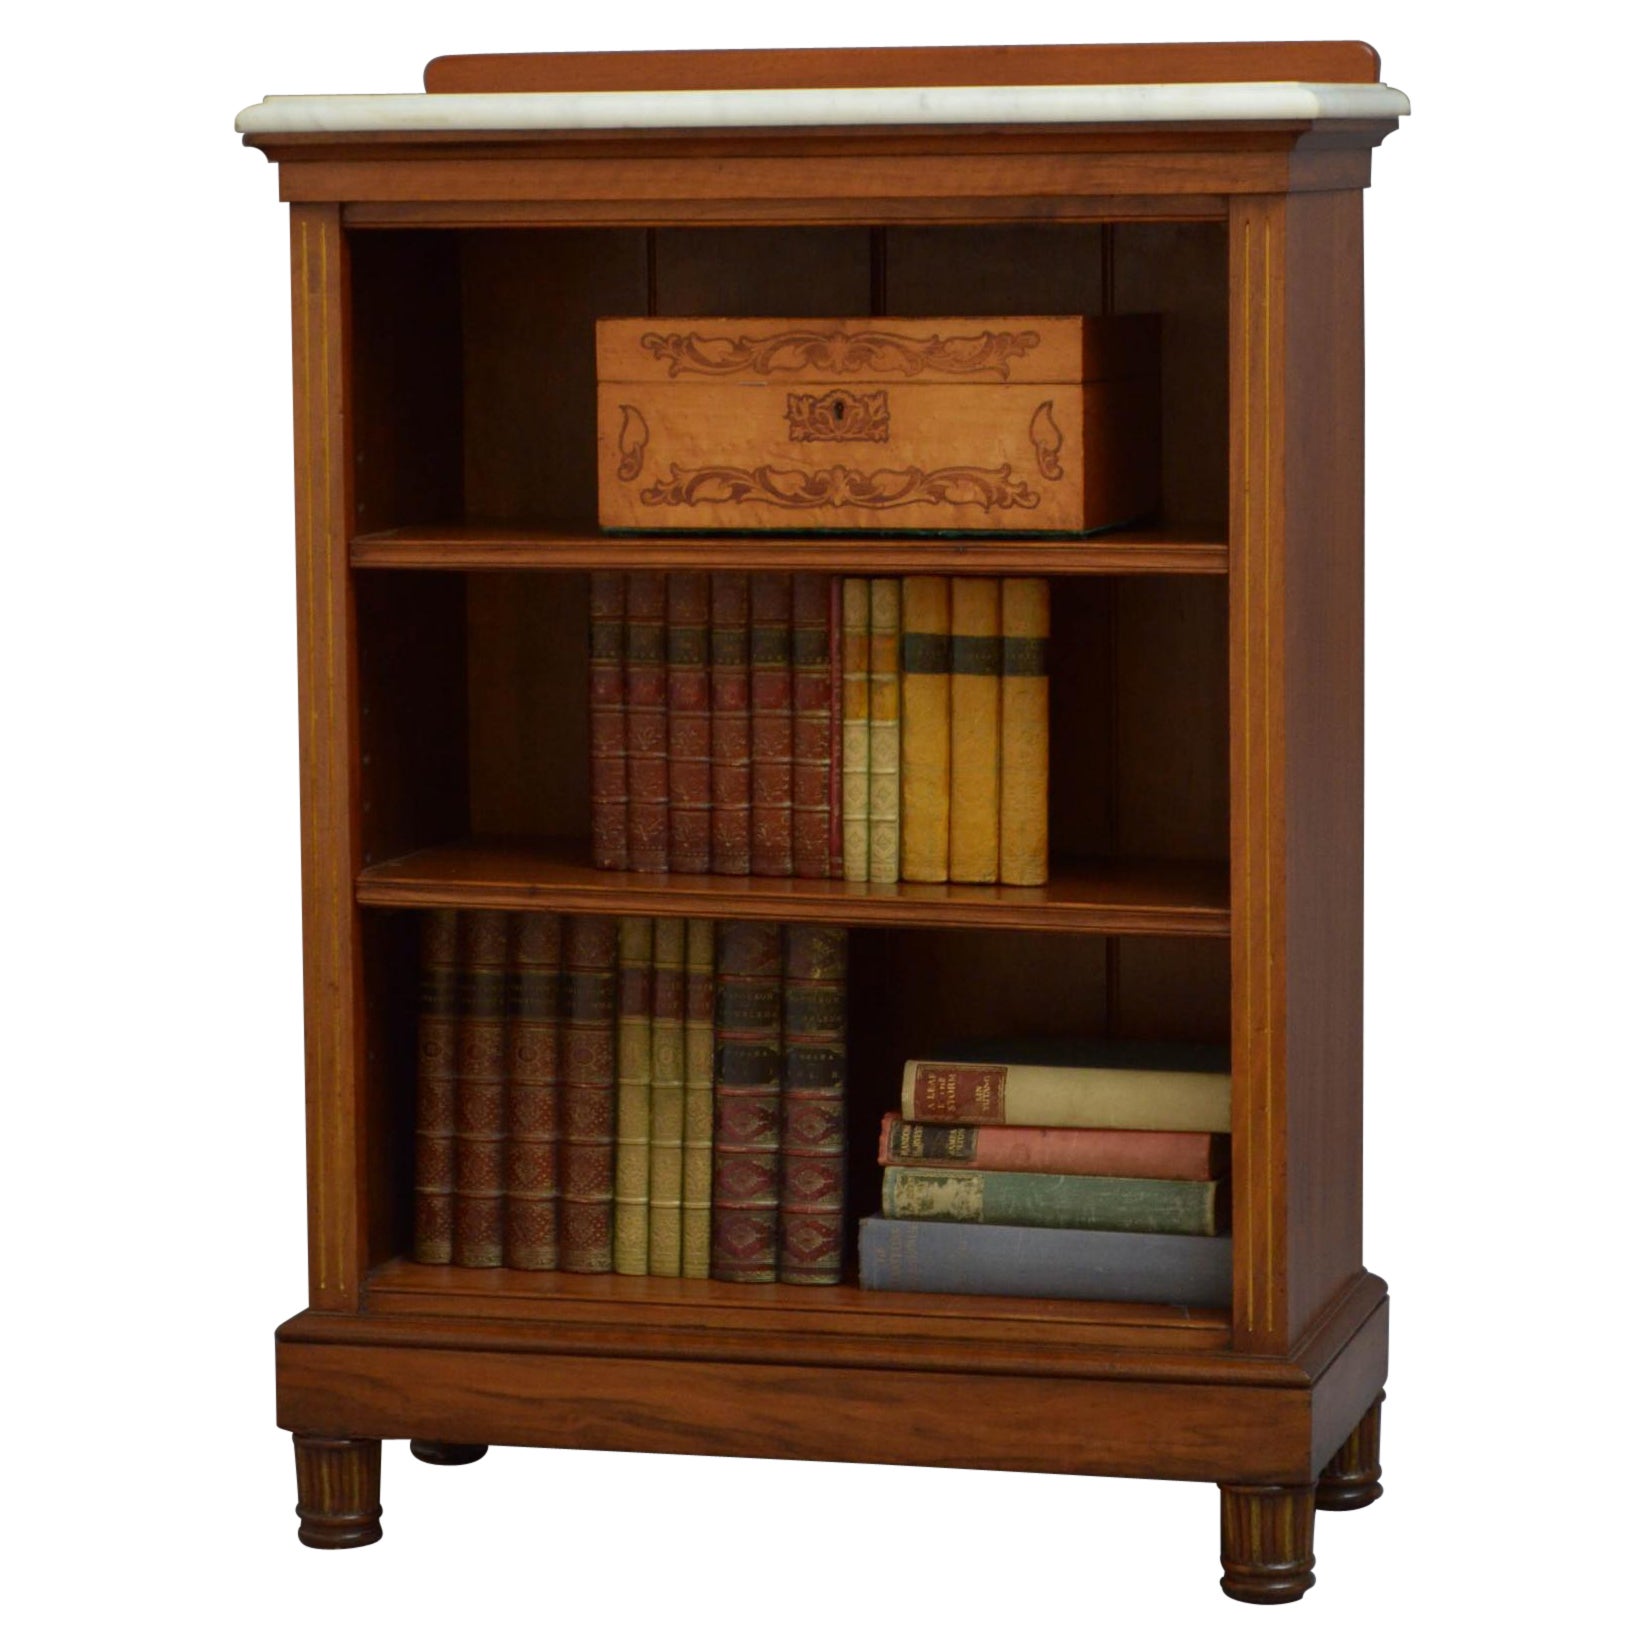 James Shoolbred & Co Small Open Bookcase